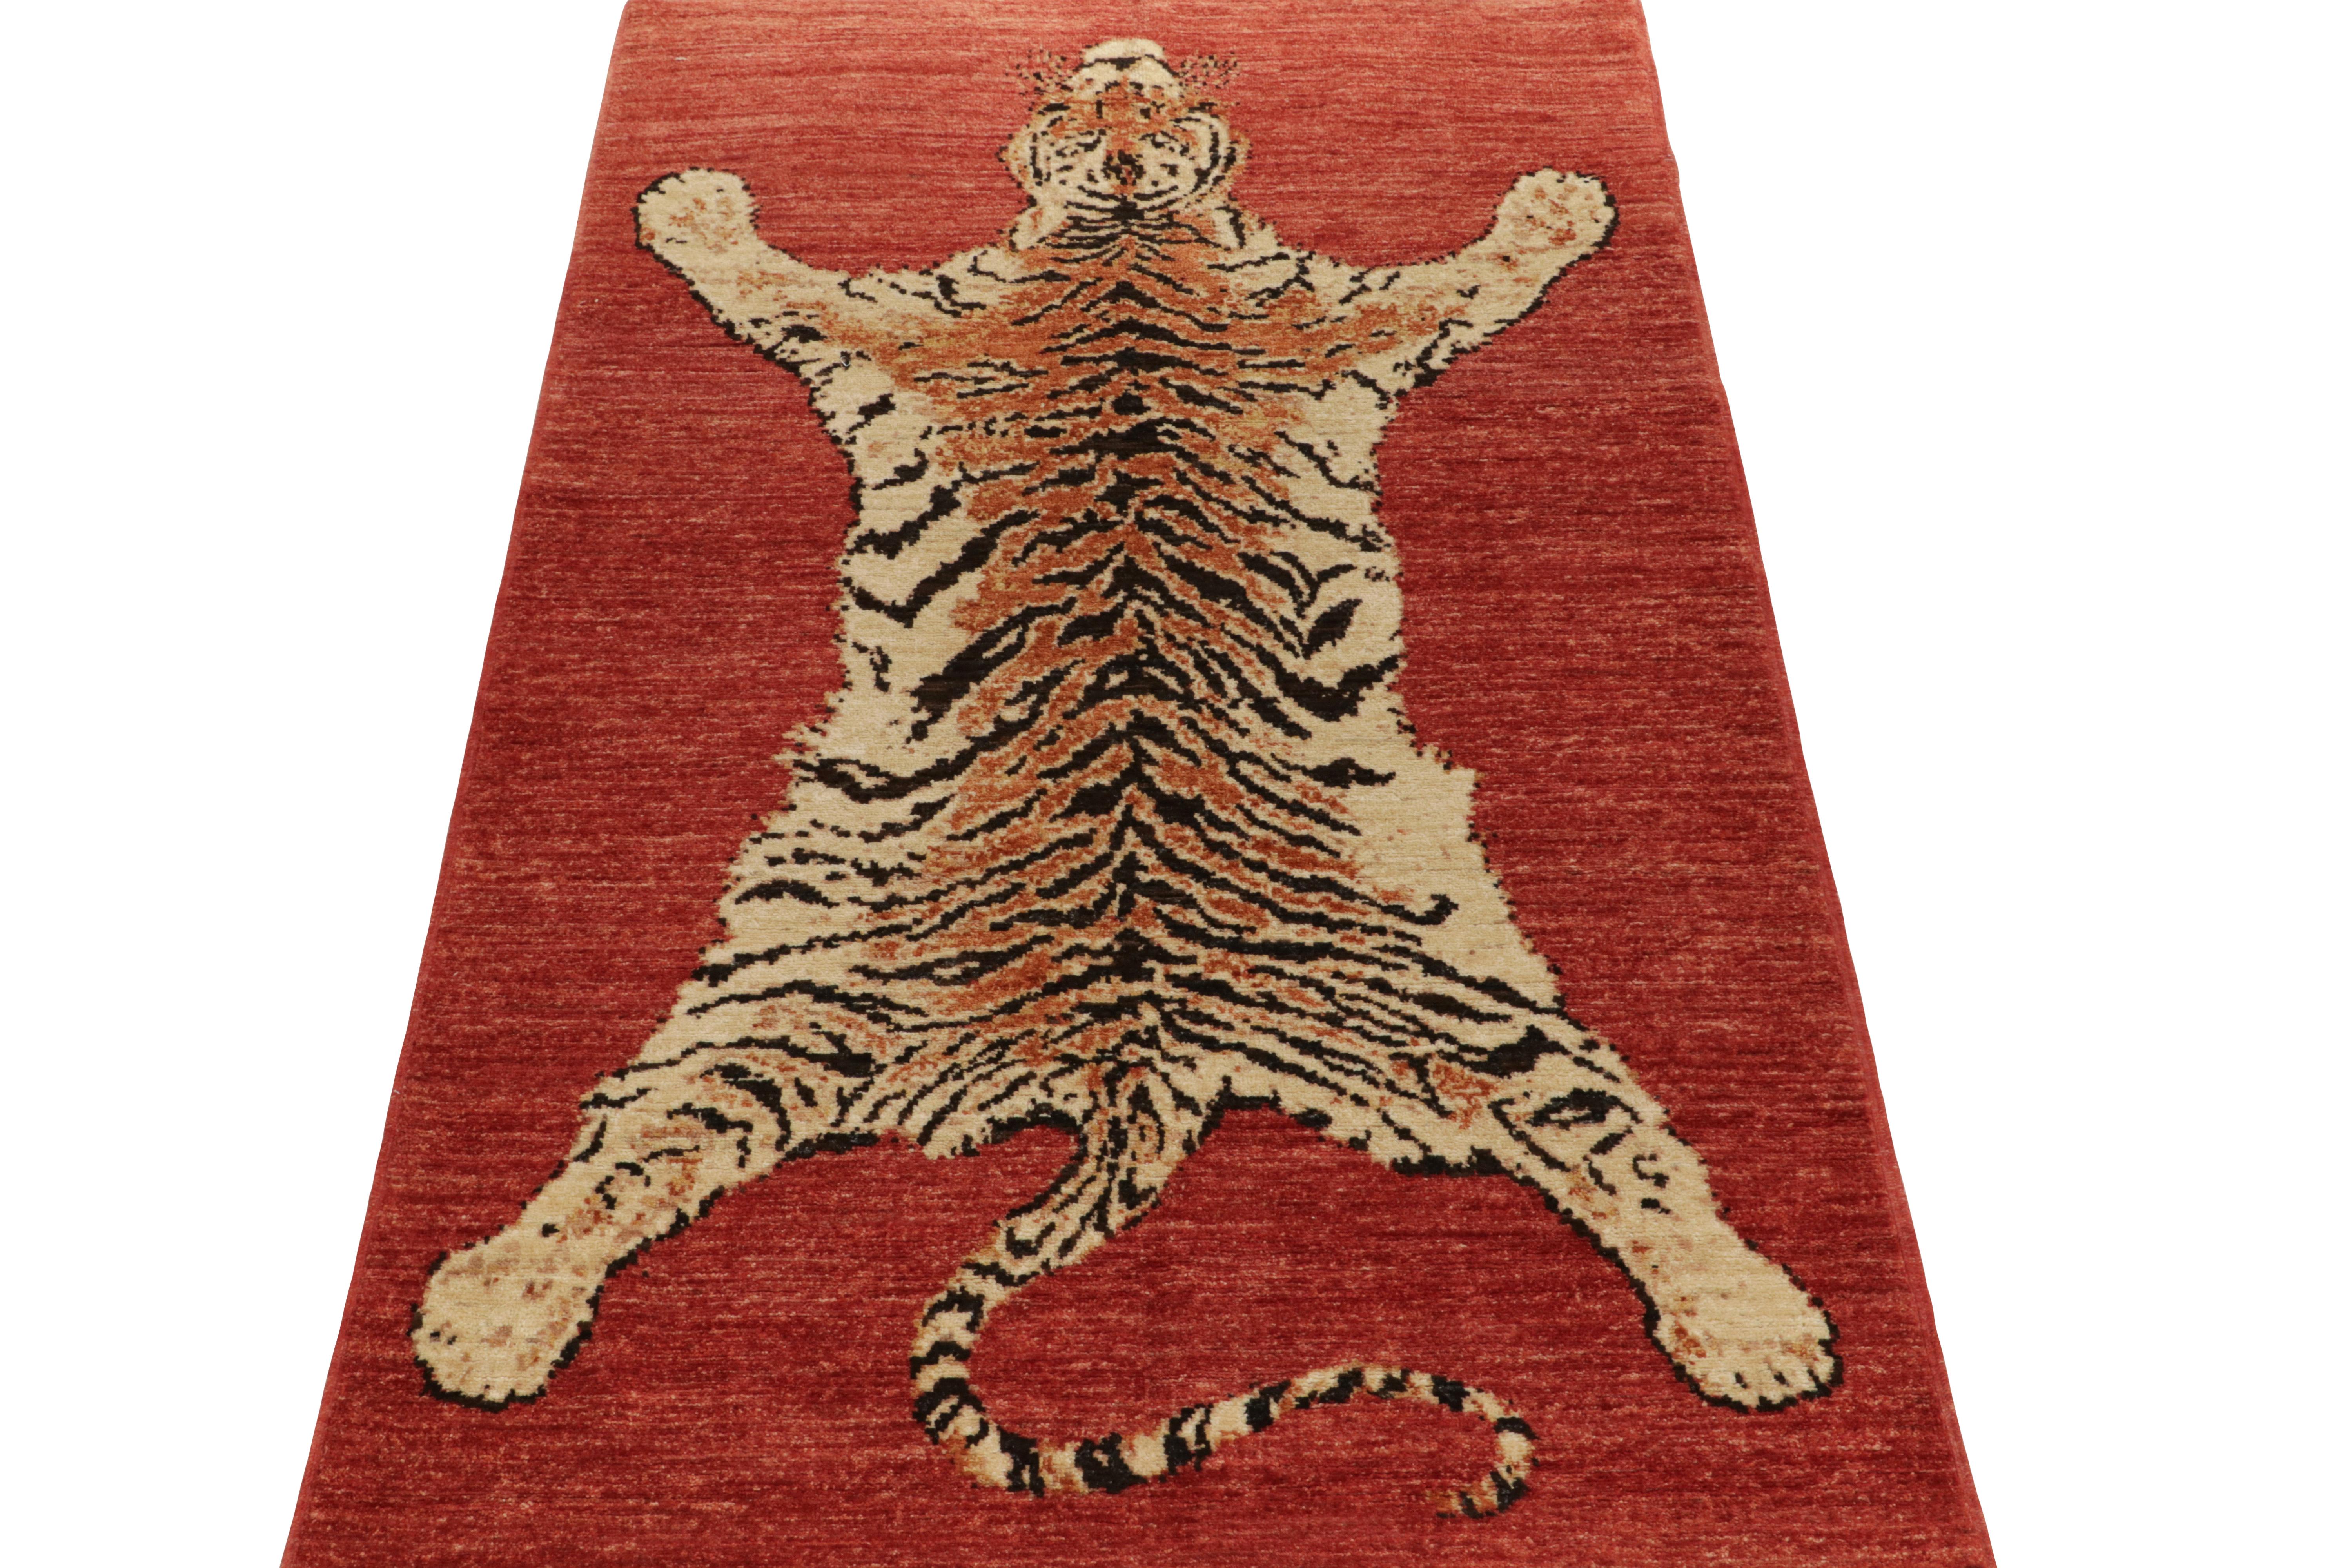 Hand knotted in wool, Rug & Kilim presents this 4x7 piece from its most graphic new collection, inspired by coveted Tiger skin rugs. An exemplary drawing, this pictorial enjoys a pelt pattern in beige-brown and orange on a striated red background of